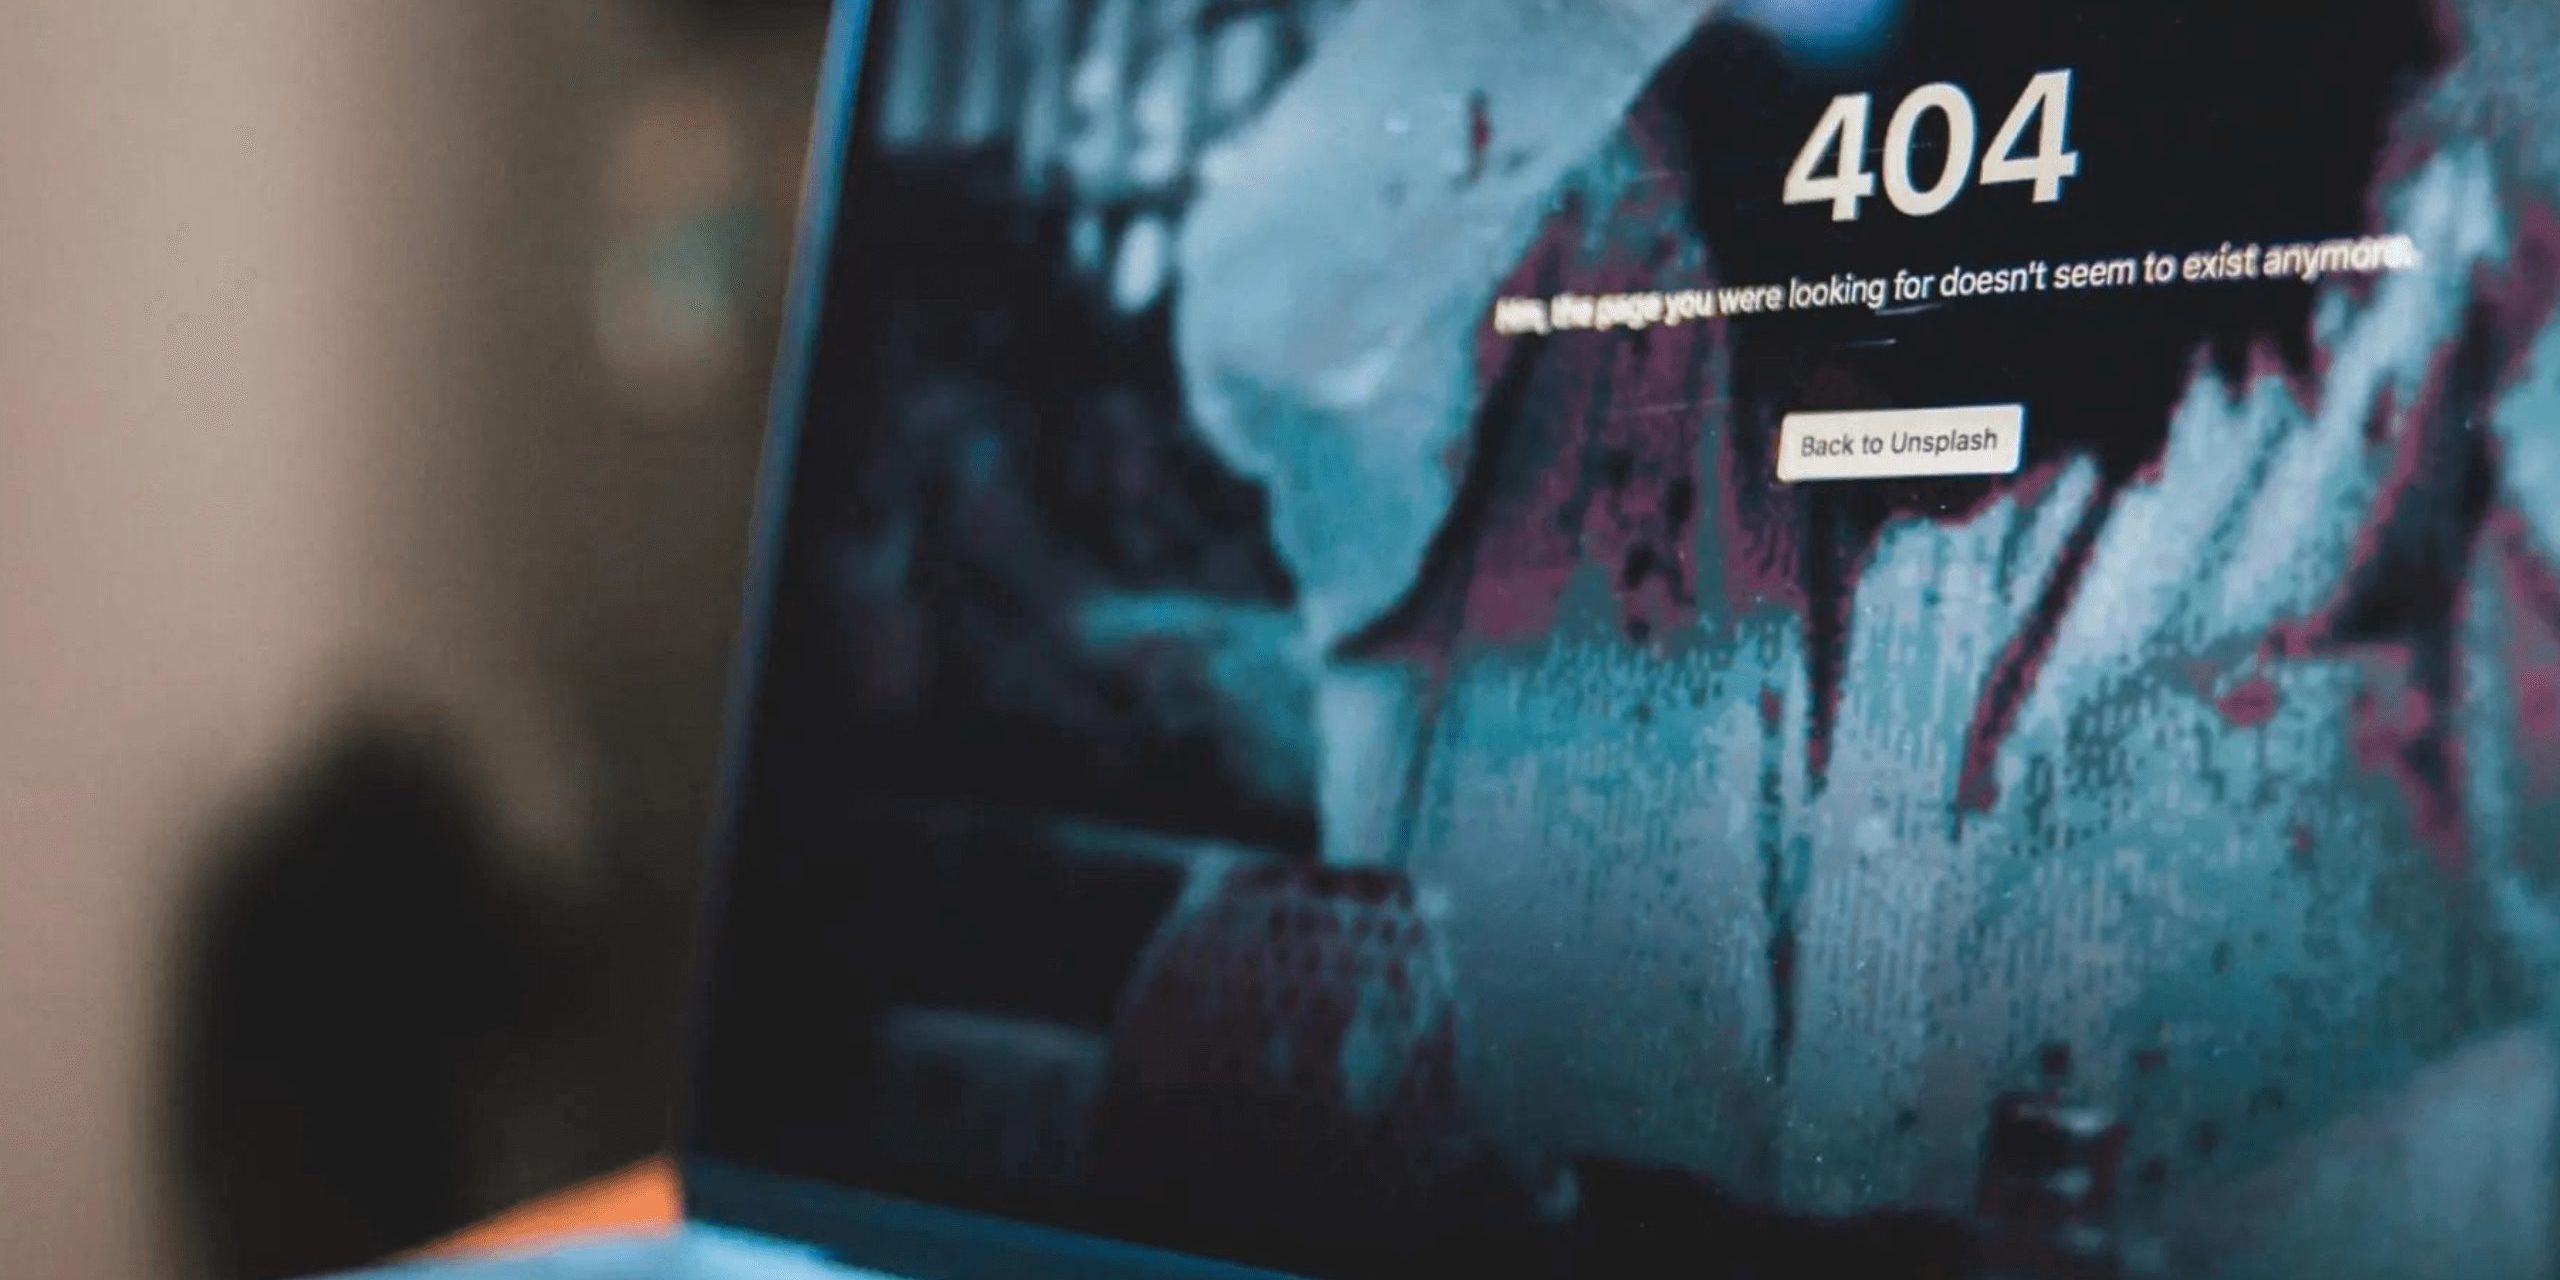 A website page showing the 404 error page